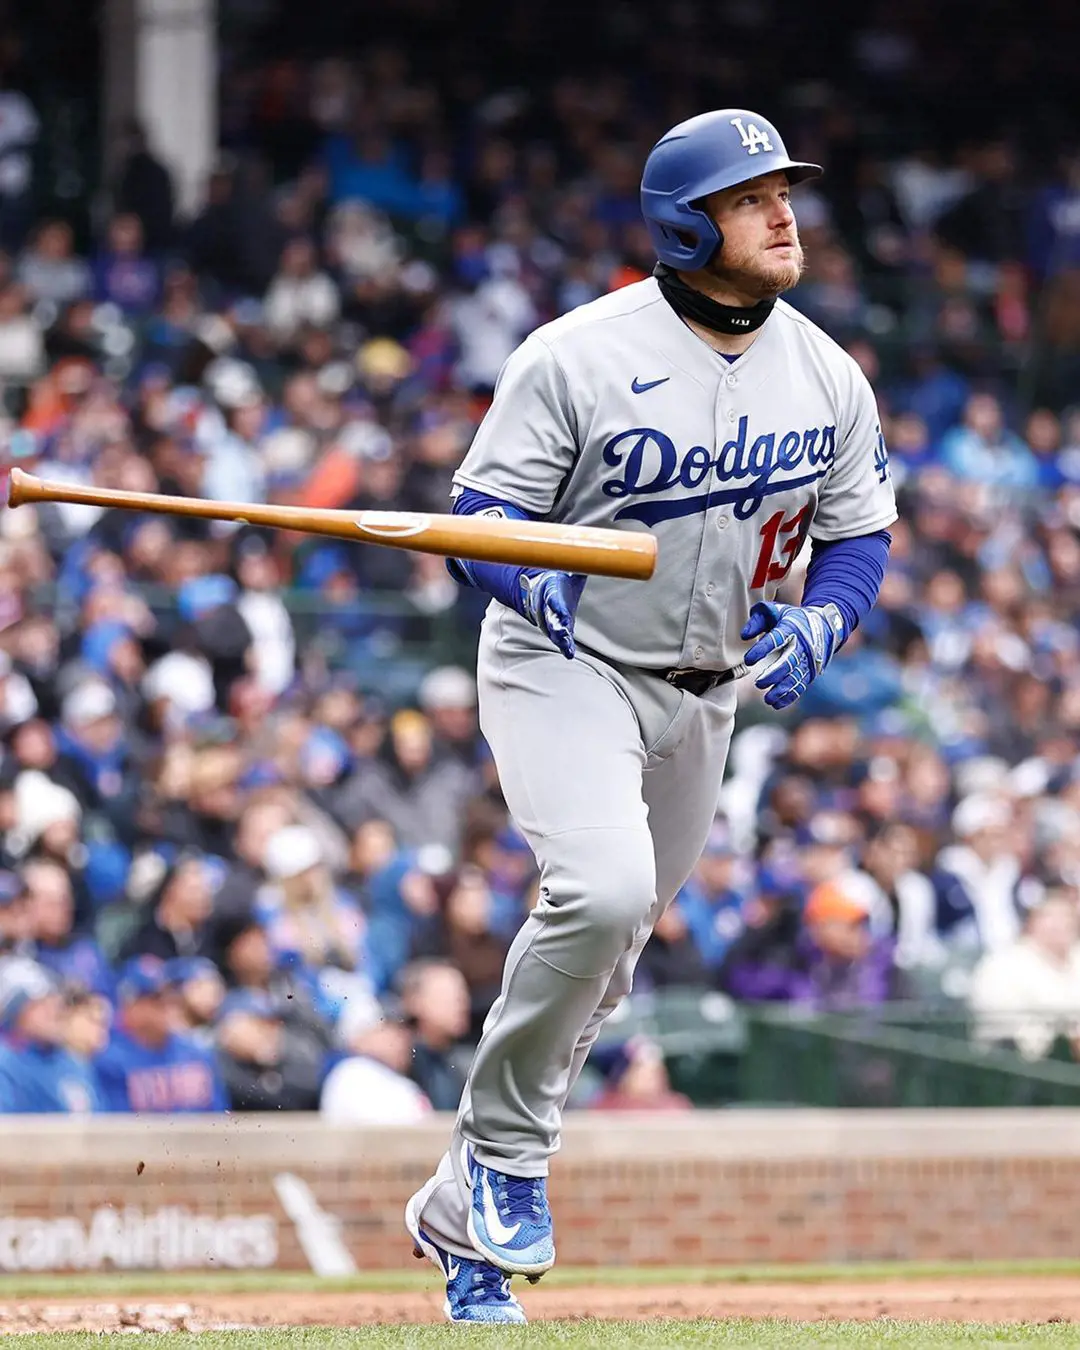 Dodgers star Max Muncy with 11th home run of the 2022-23 season